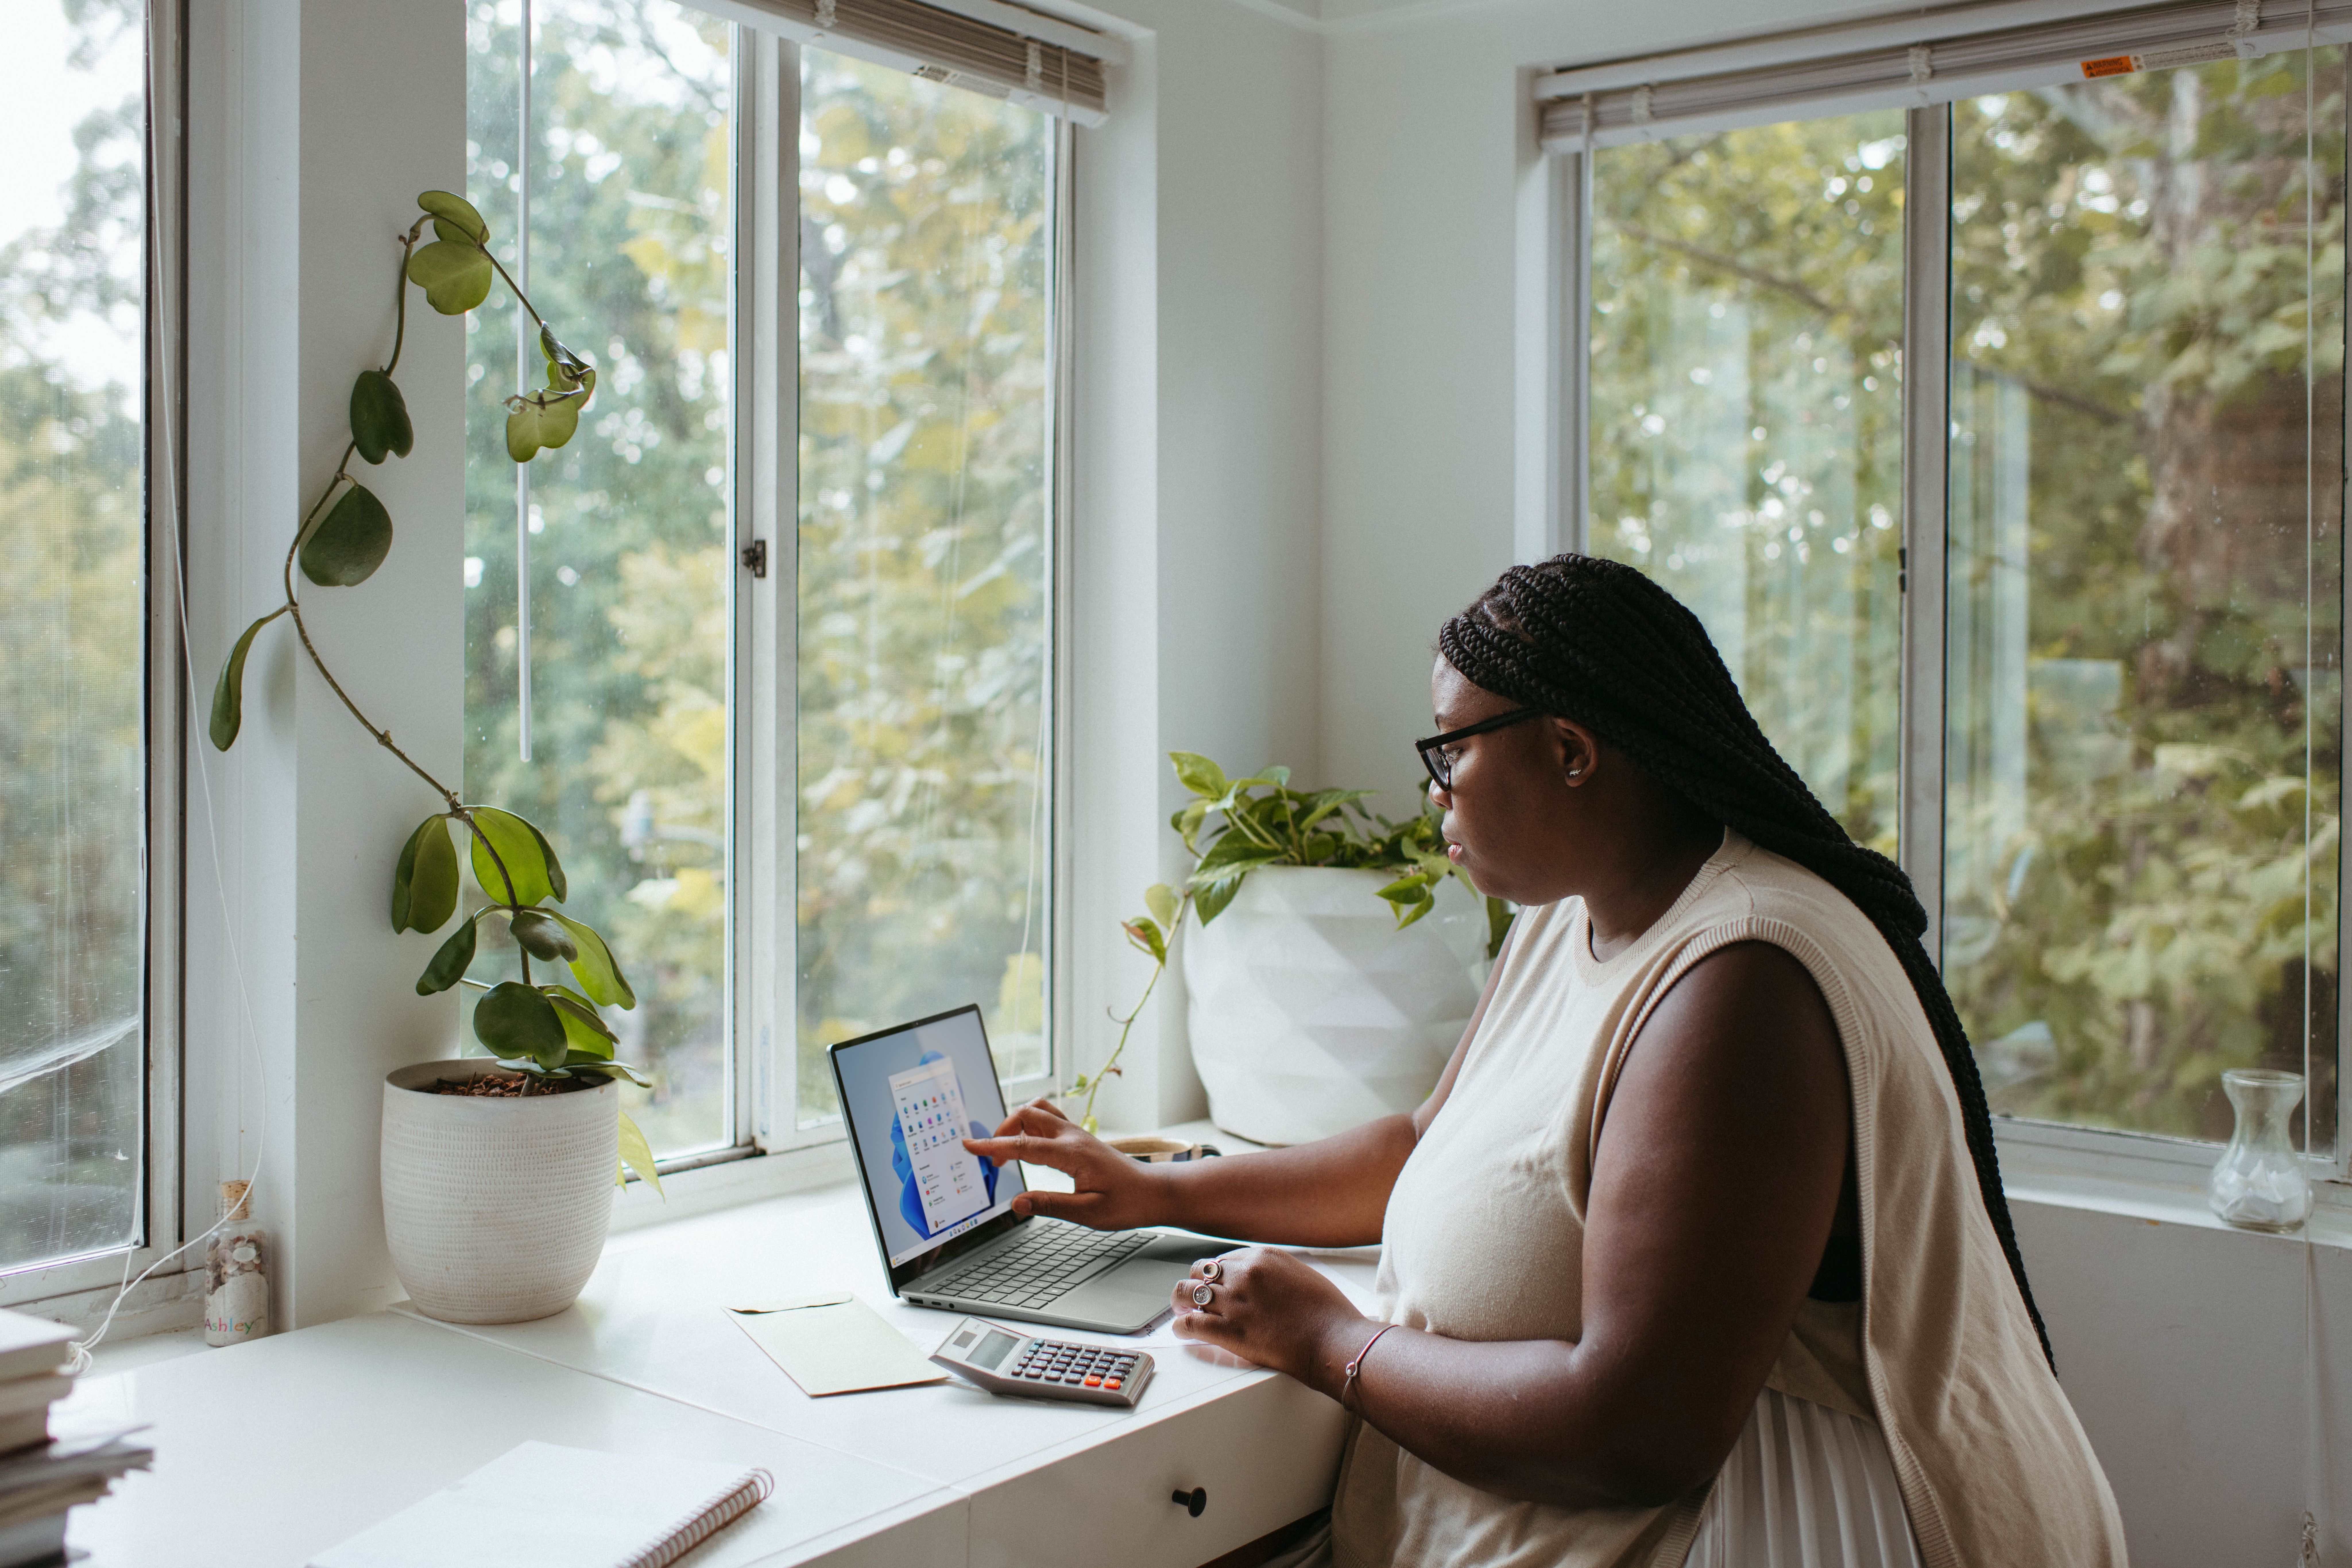 Qualities Employers Look For in Work-from-Home Employees